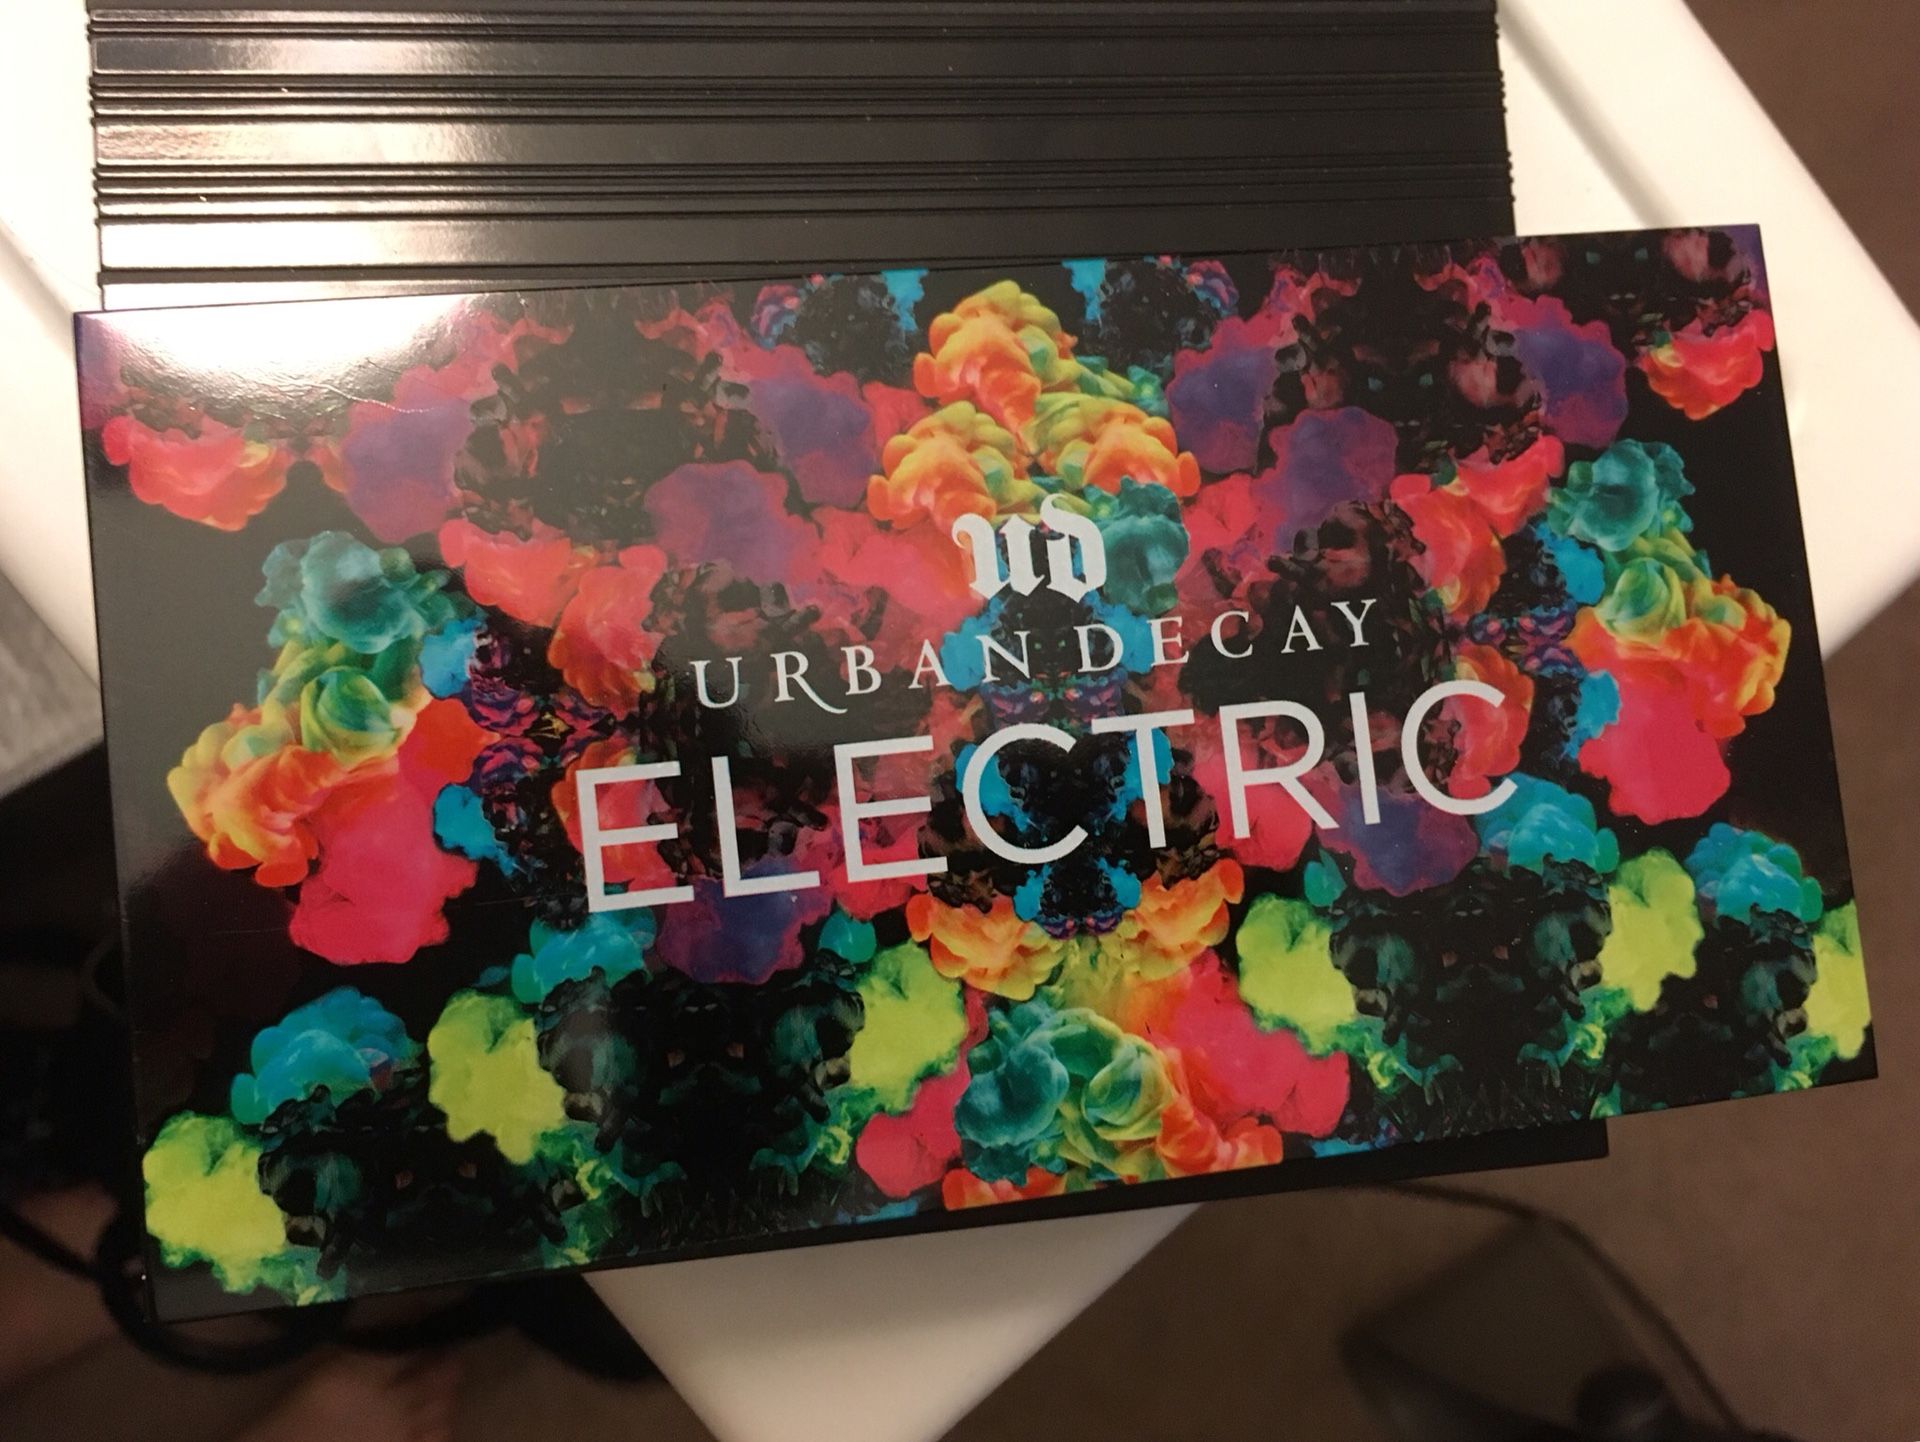 Urban decay electric palette